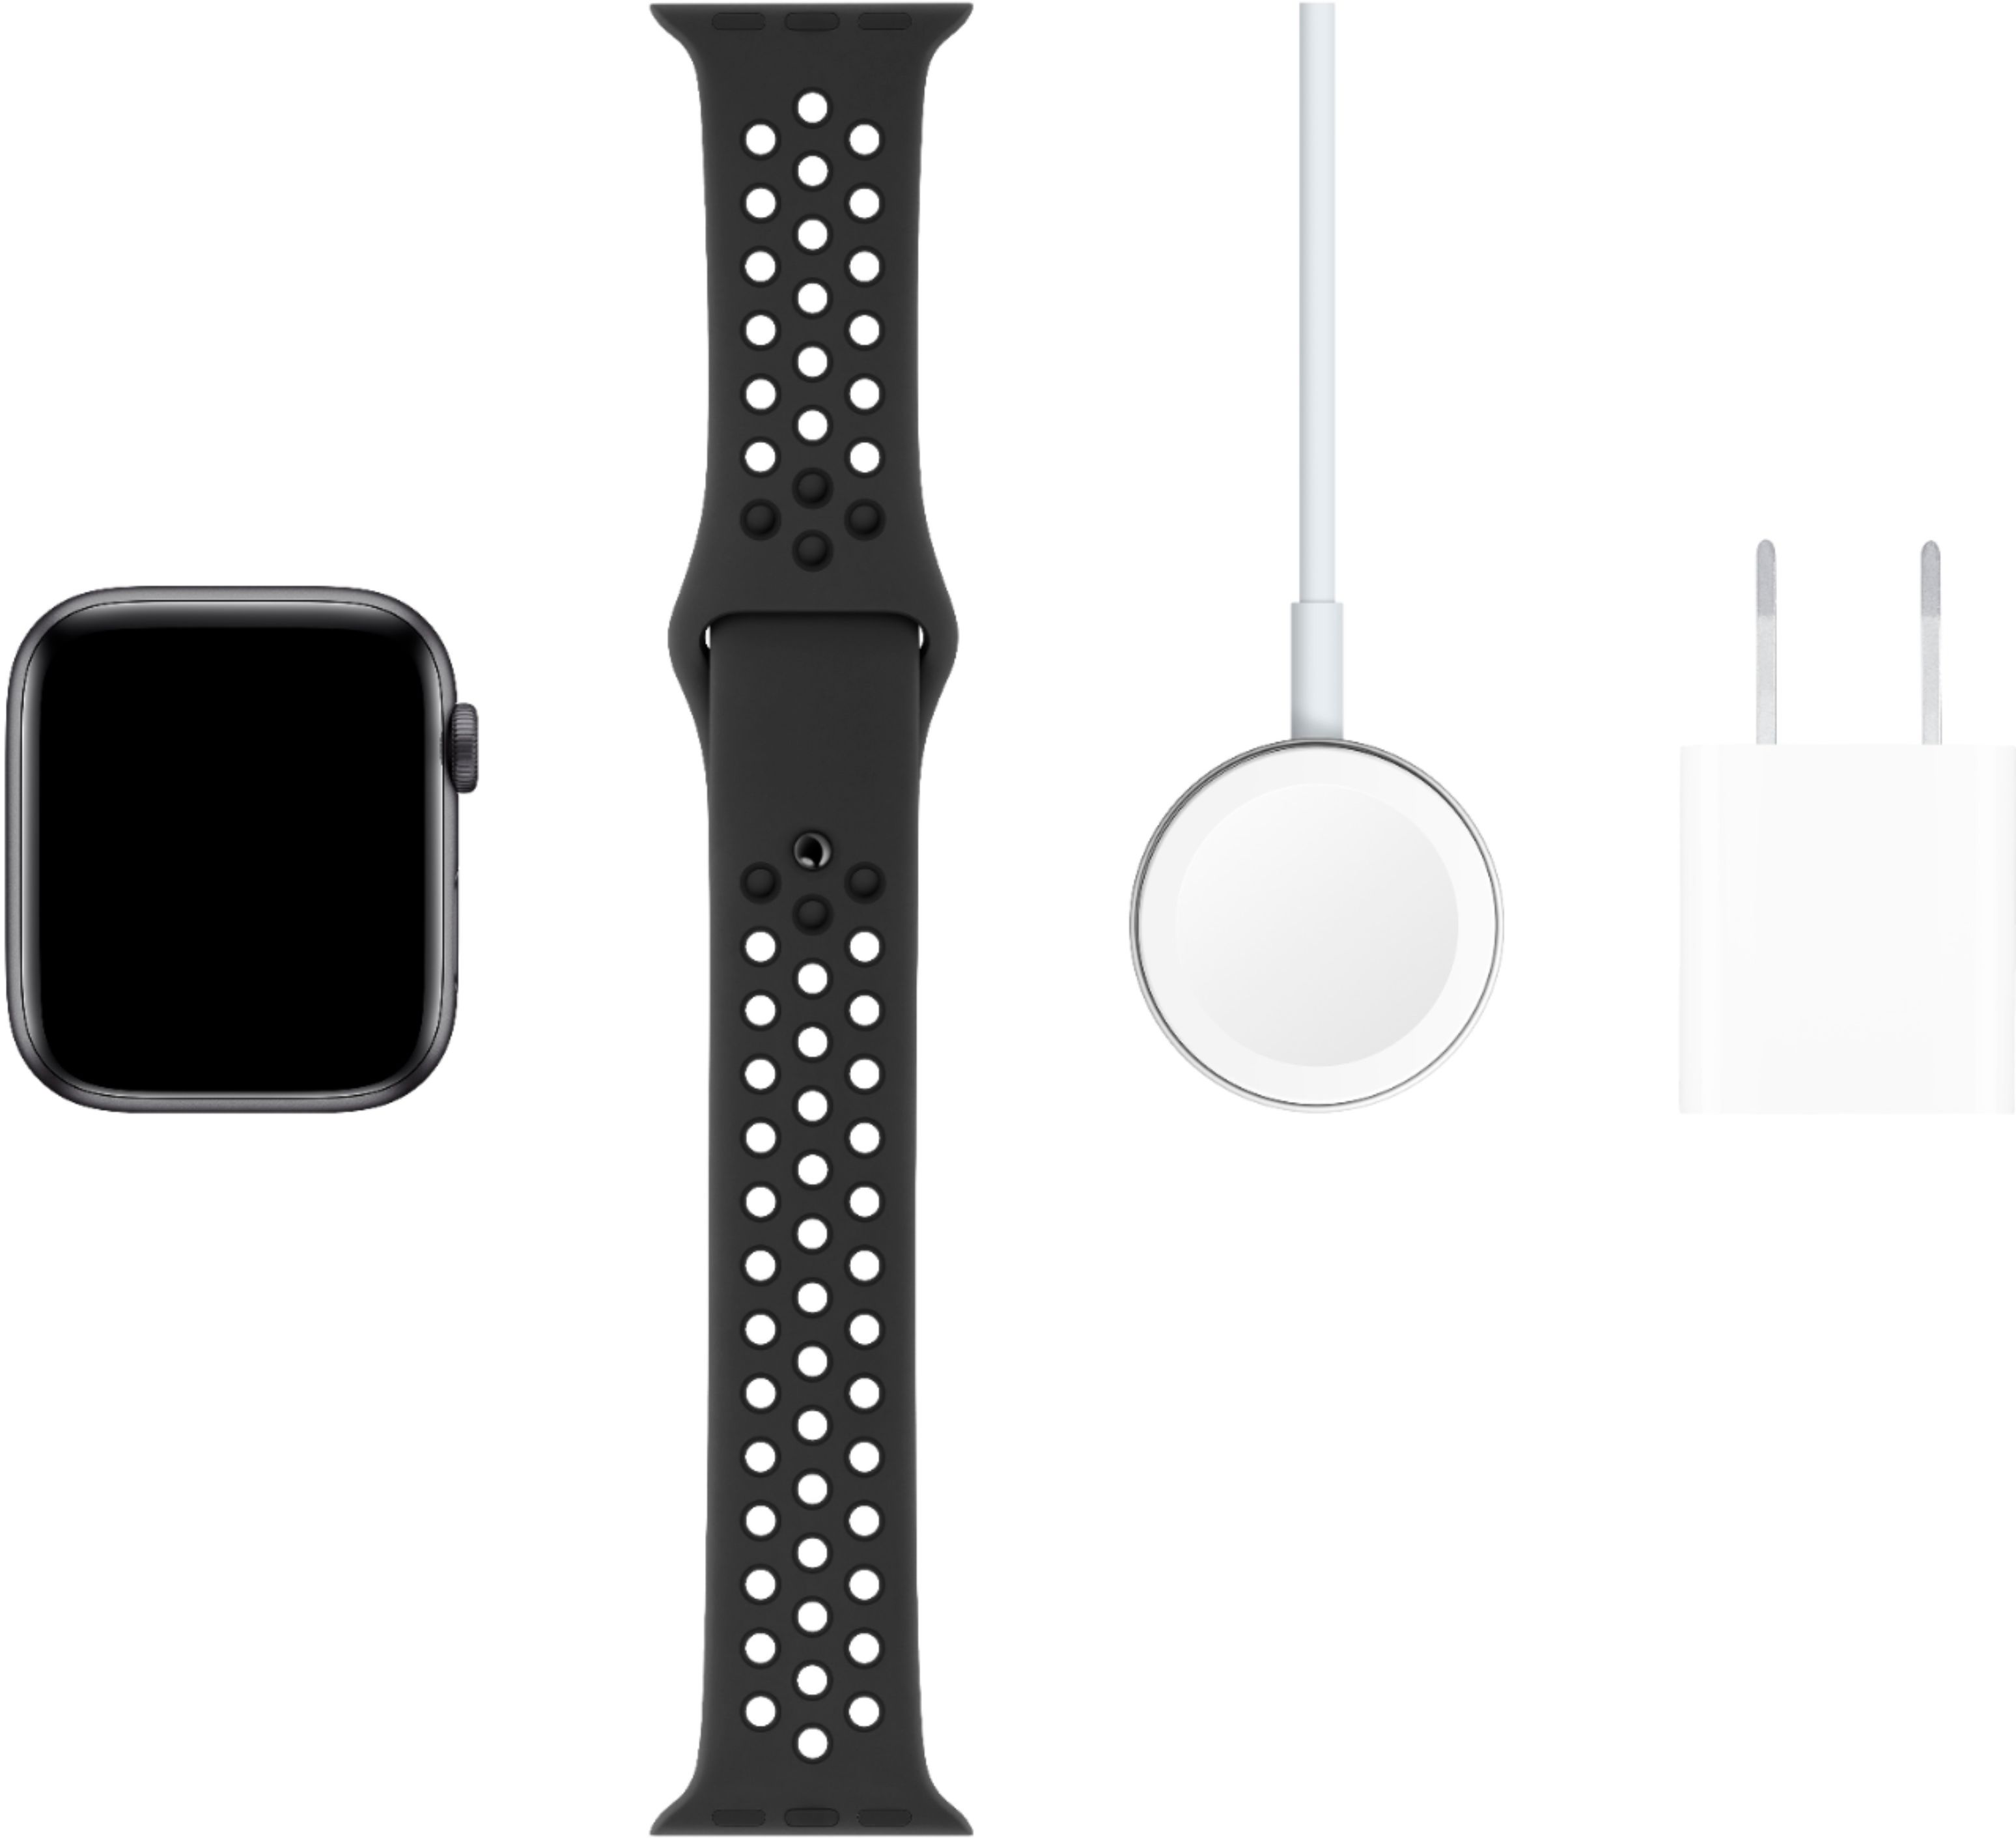 Mujer joven santo Oclusión Best Buy: Apple Watch Nike Series 5 (GPS + Cellular) 44mm Space Gray  Aluminum Case with Anthracite/Black Nike Sport Band Space Gray Aluminum  MX3A2LL/A